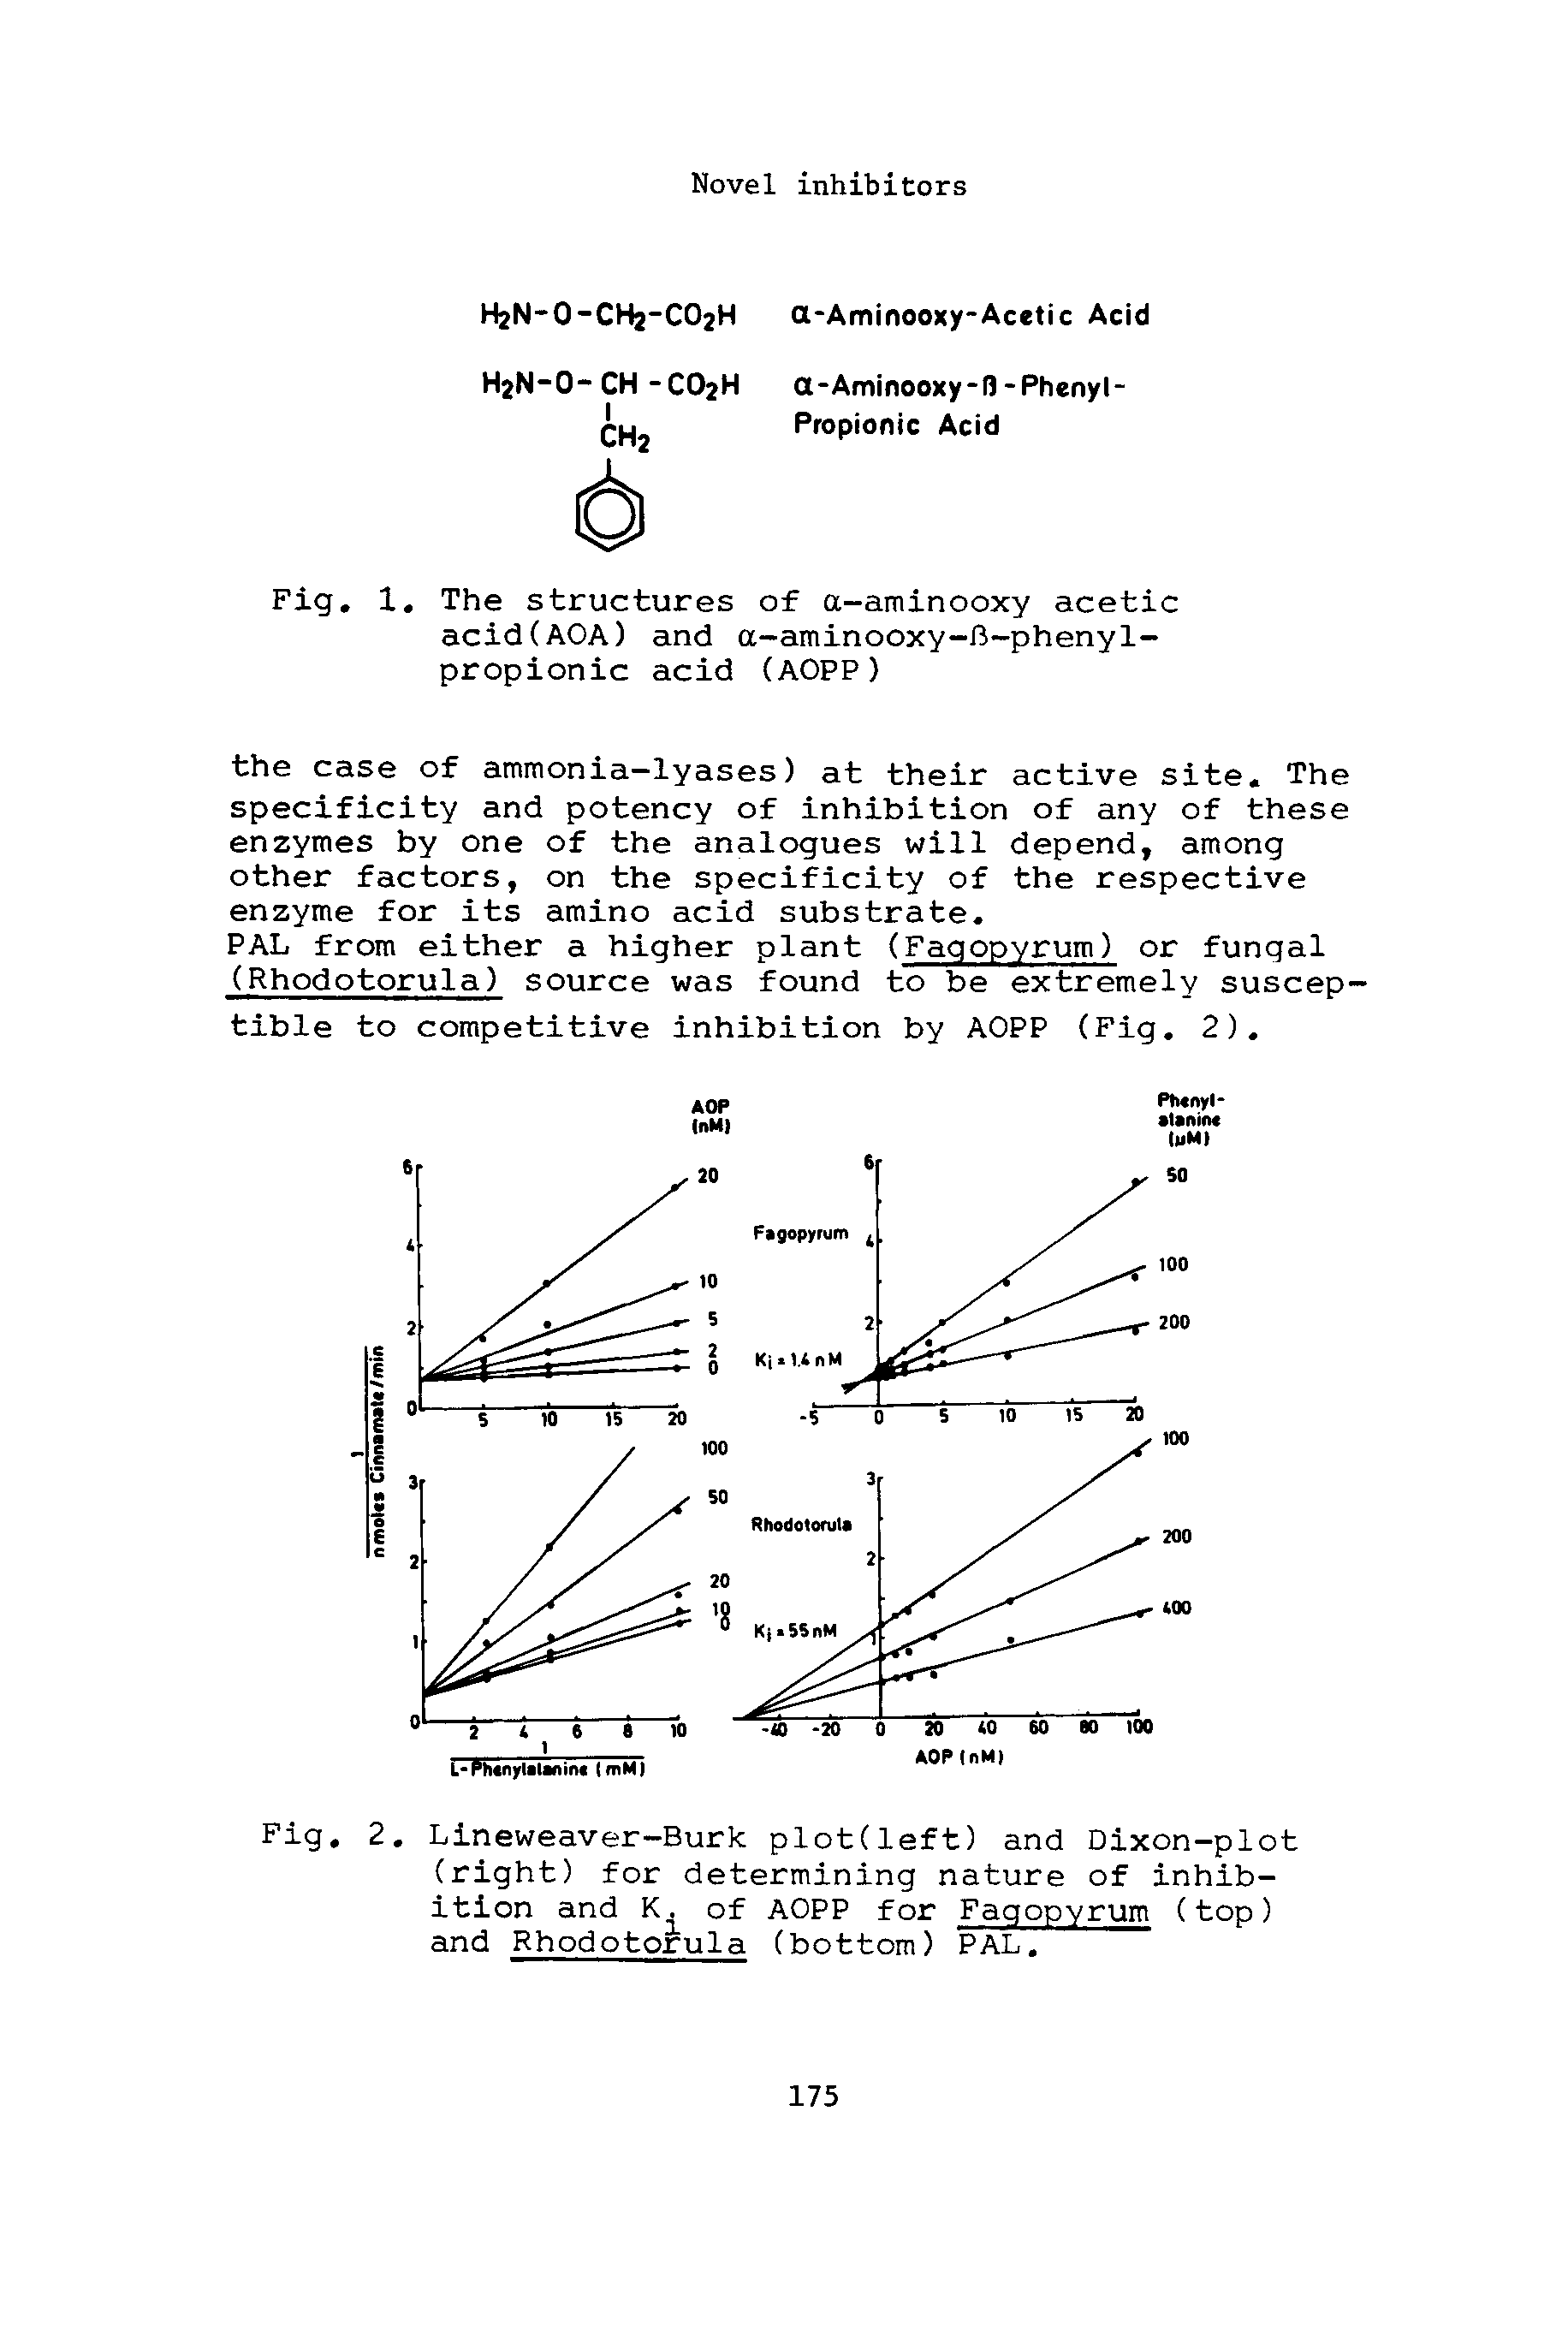 Fig. 2. Lineweaver-Burk plot(left) and Dixon-plot (right) for determining nature of inhibition and K. of AOPP for Faqopyrum (top) and Rhodotorula (bottom) PAL,...